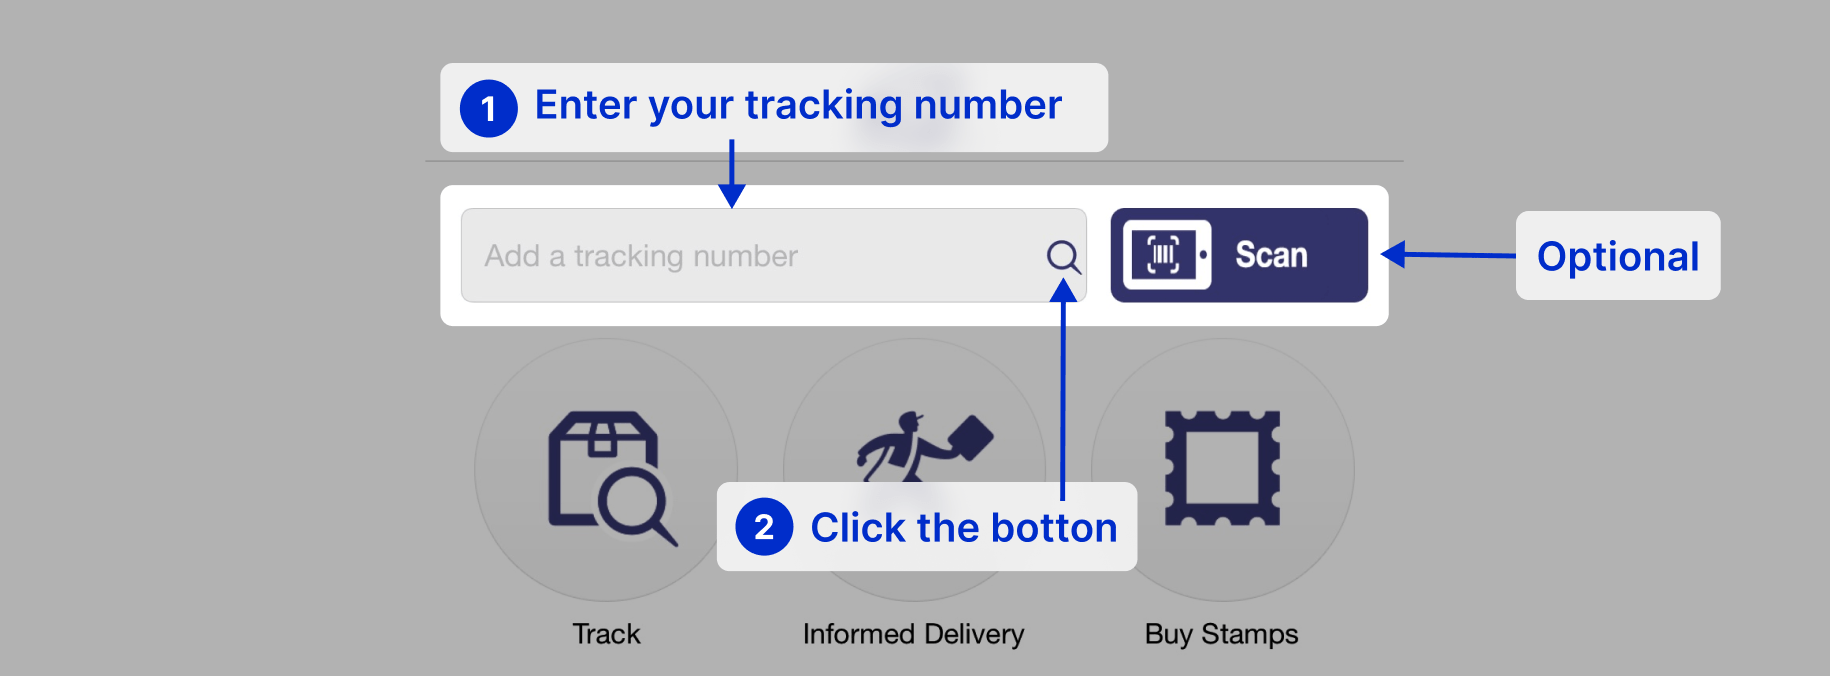 USPS Tracking. Learn how to track package via USPS APP. Enter your tracking number on the USPS.